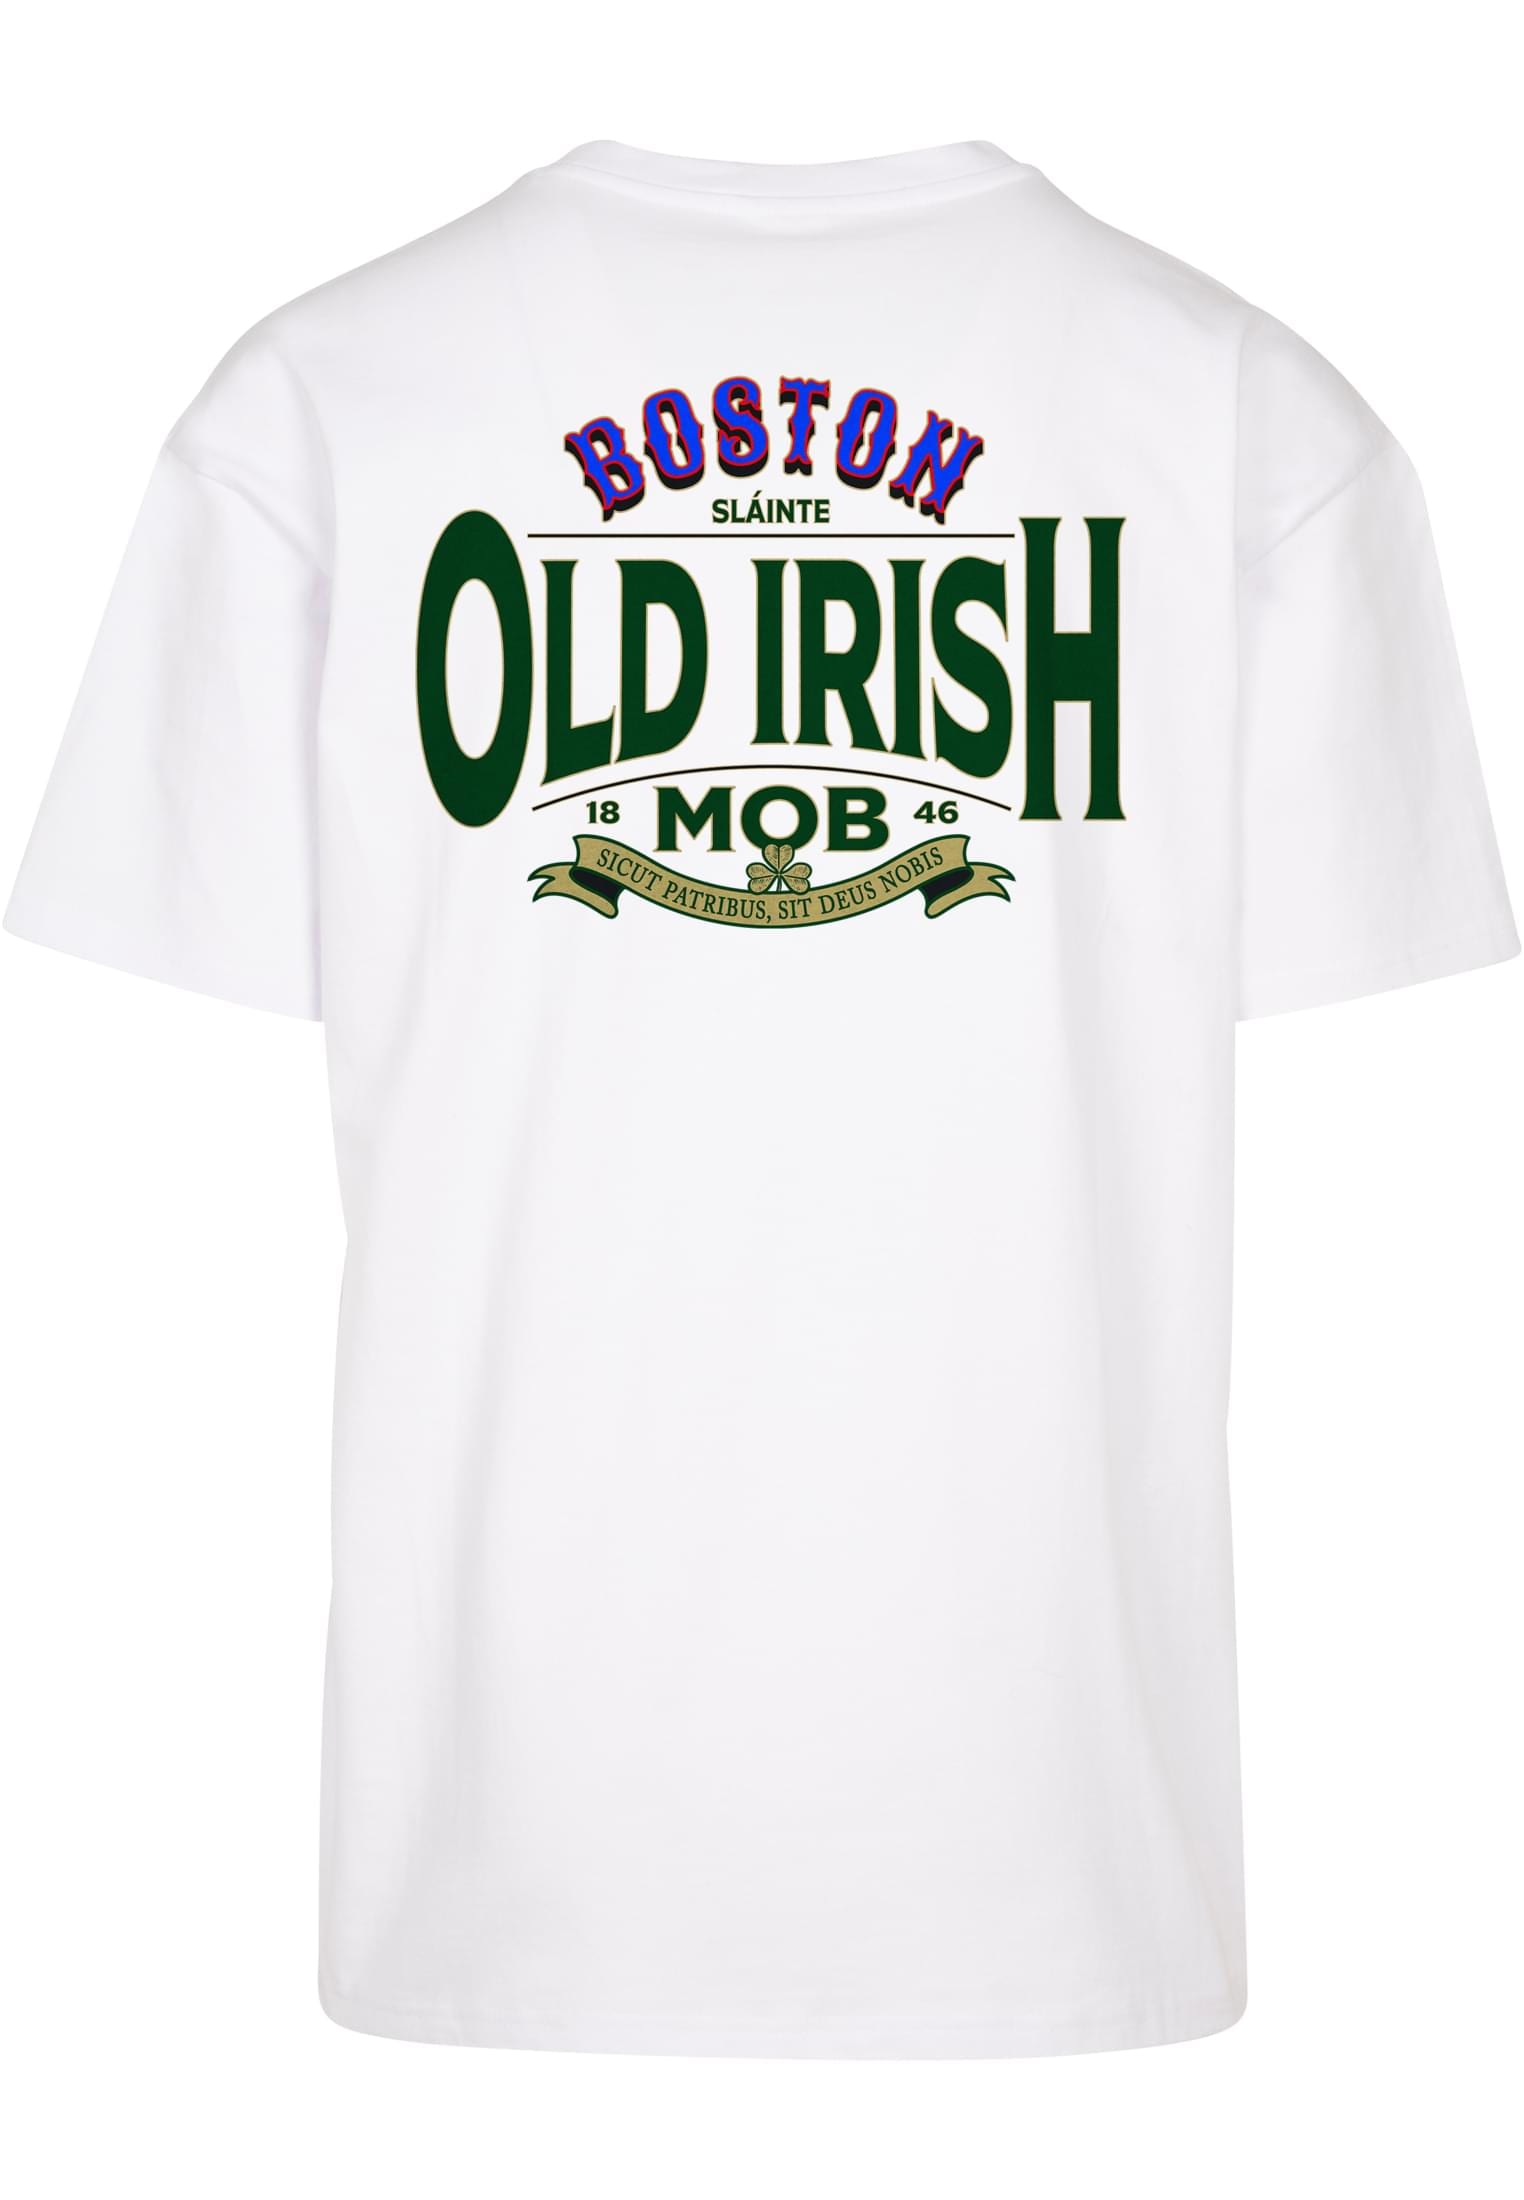 Upscale by Mister Tee T-Shirt »Upscale by Mister Tee Herren Old Irish Mob Oversize Tee«, (1 tlg.)